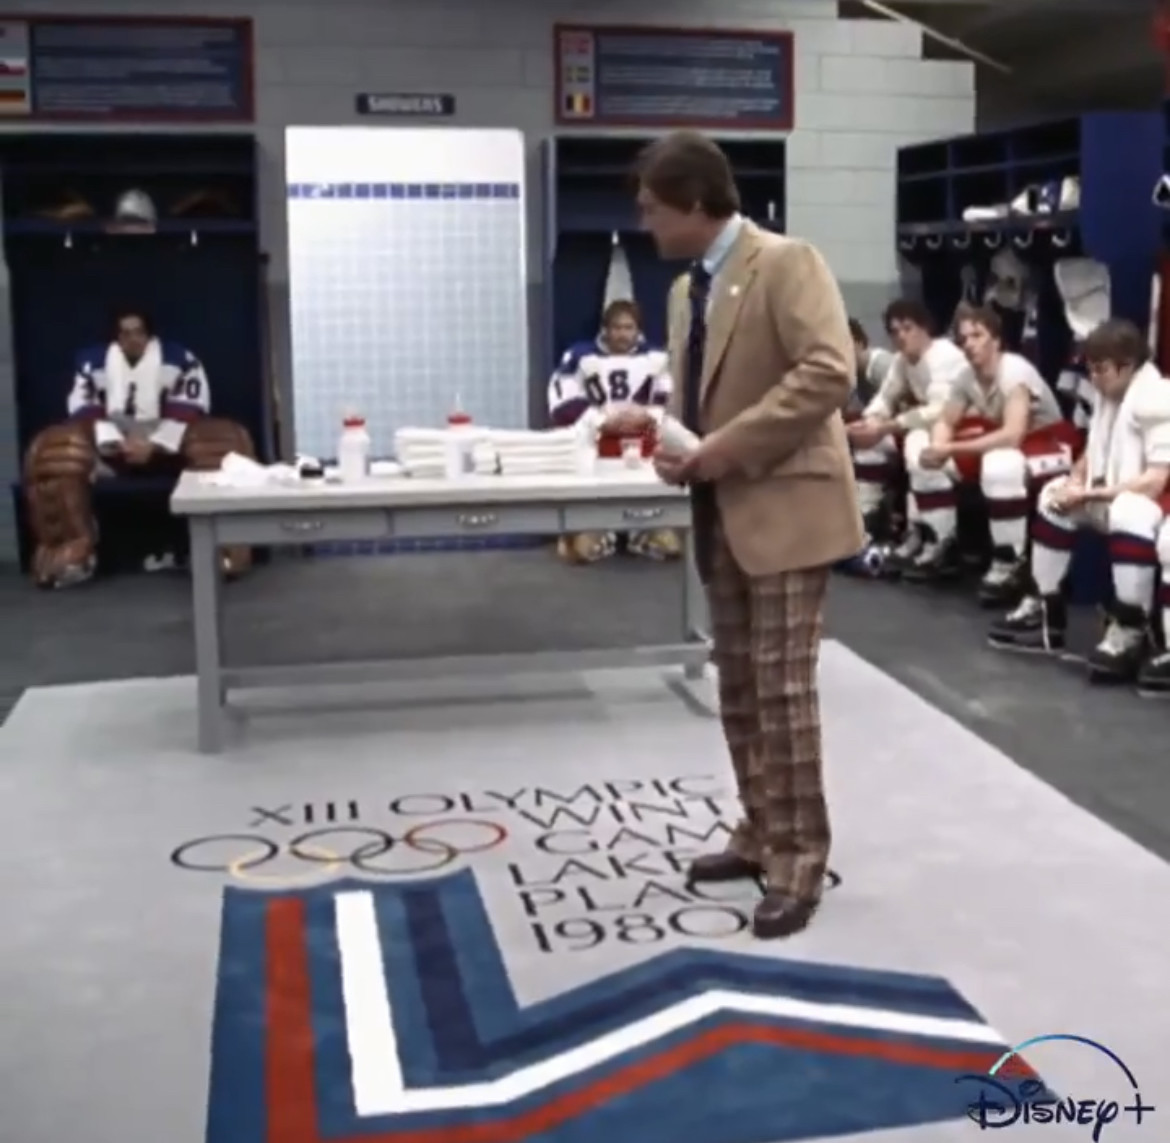 The COACH broke the cardinal sin of hockey. NEVER walk on the logo in the dressing room!!.. Unwritten rules that only exist to make people's lives just that little bit more restrictive can go to hell.